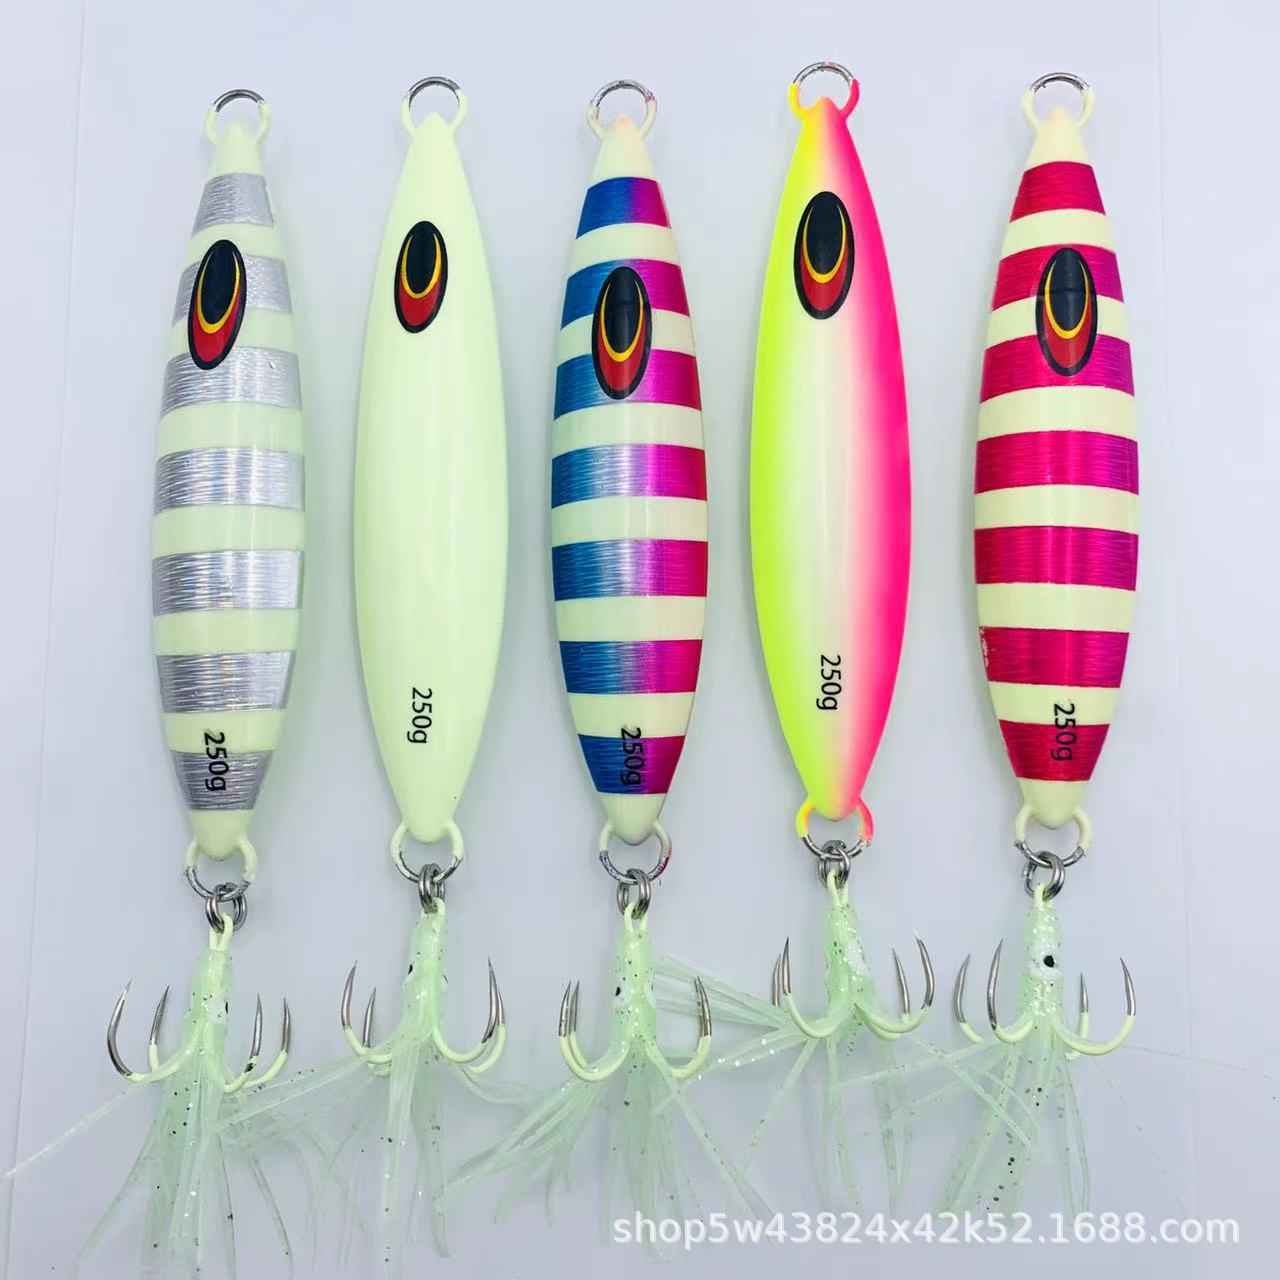 156 Slow Pitch Jigs Bait 80g 100g 120g 150g 200g 250g 300g 400g – Jigs  Fishing Tackle Store